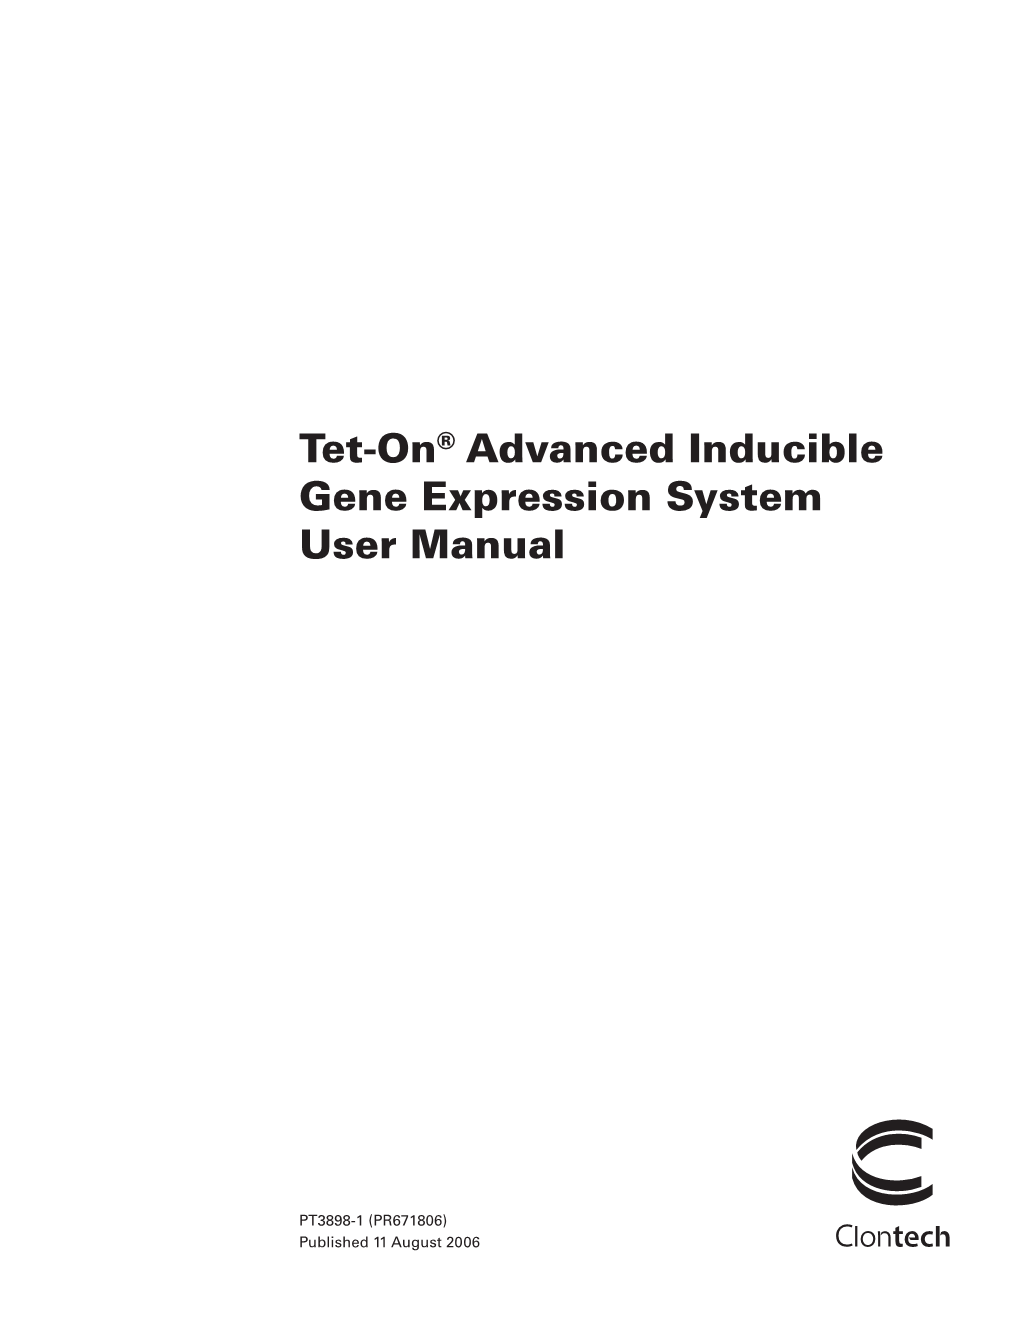 Tet-On® Advanced Inducible Gene Expression System User Manual